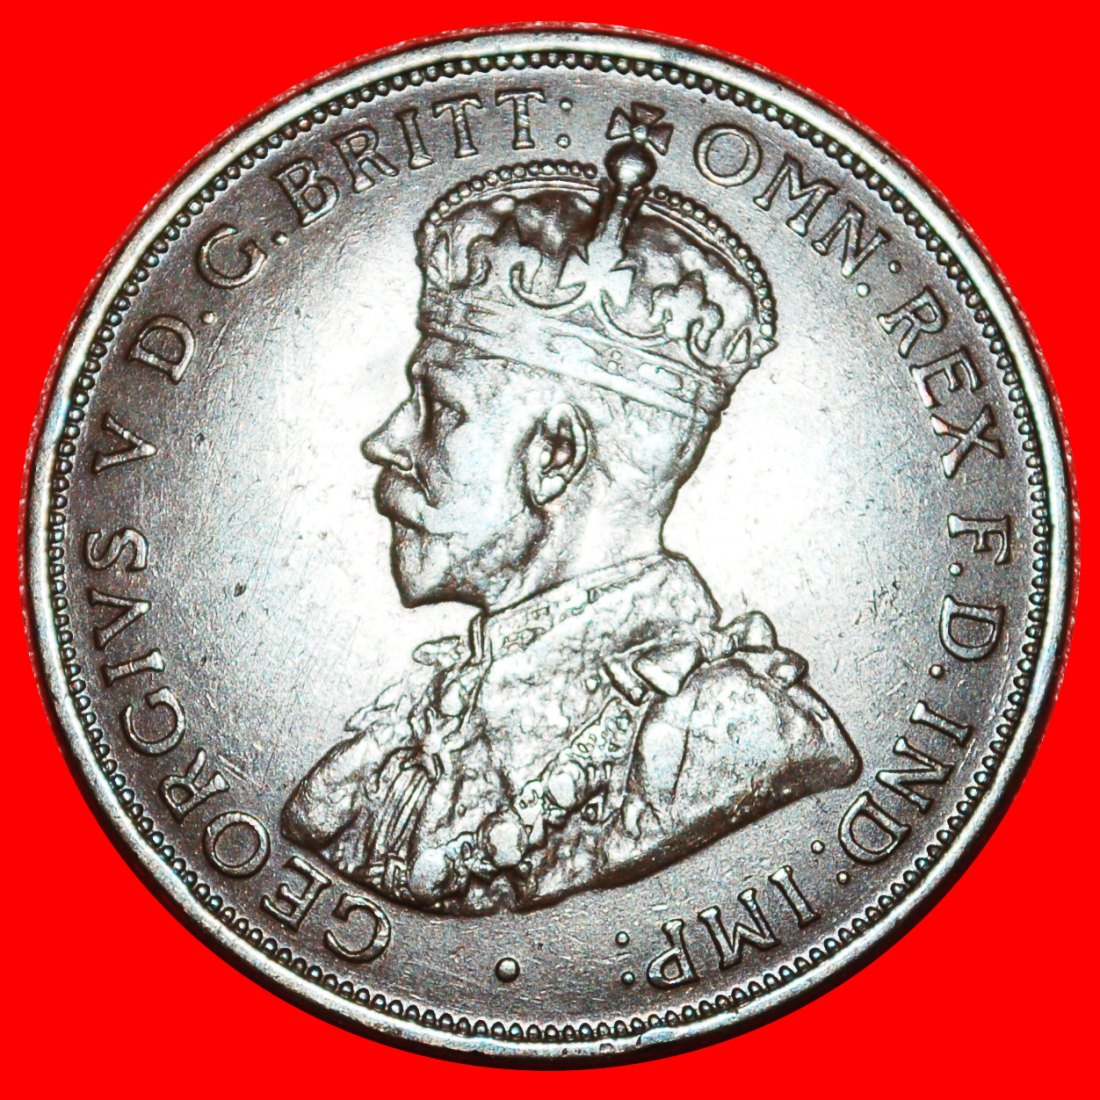  * GREAT BRITAIN GEORGE V 1911-1936:JERSEY★1/12 SHILLING 1935★TO BE PUBLISHED★LOW START ★ NO RESERVE!   